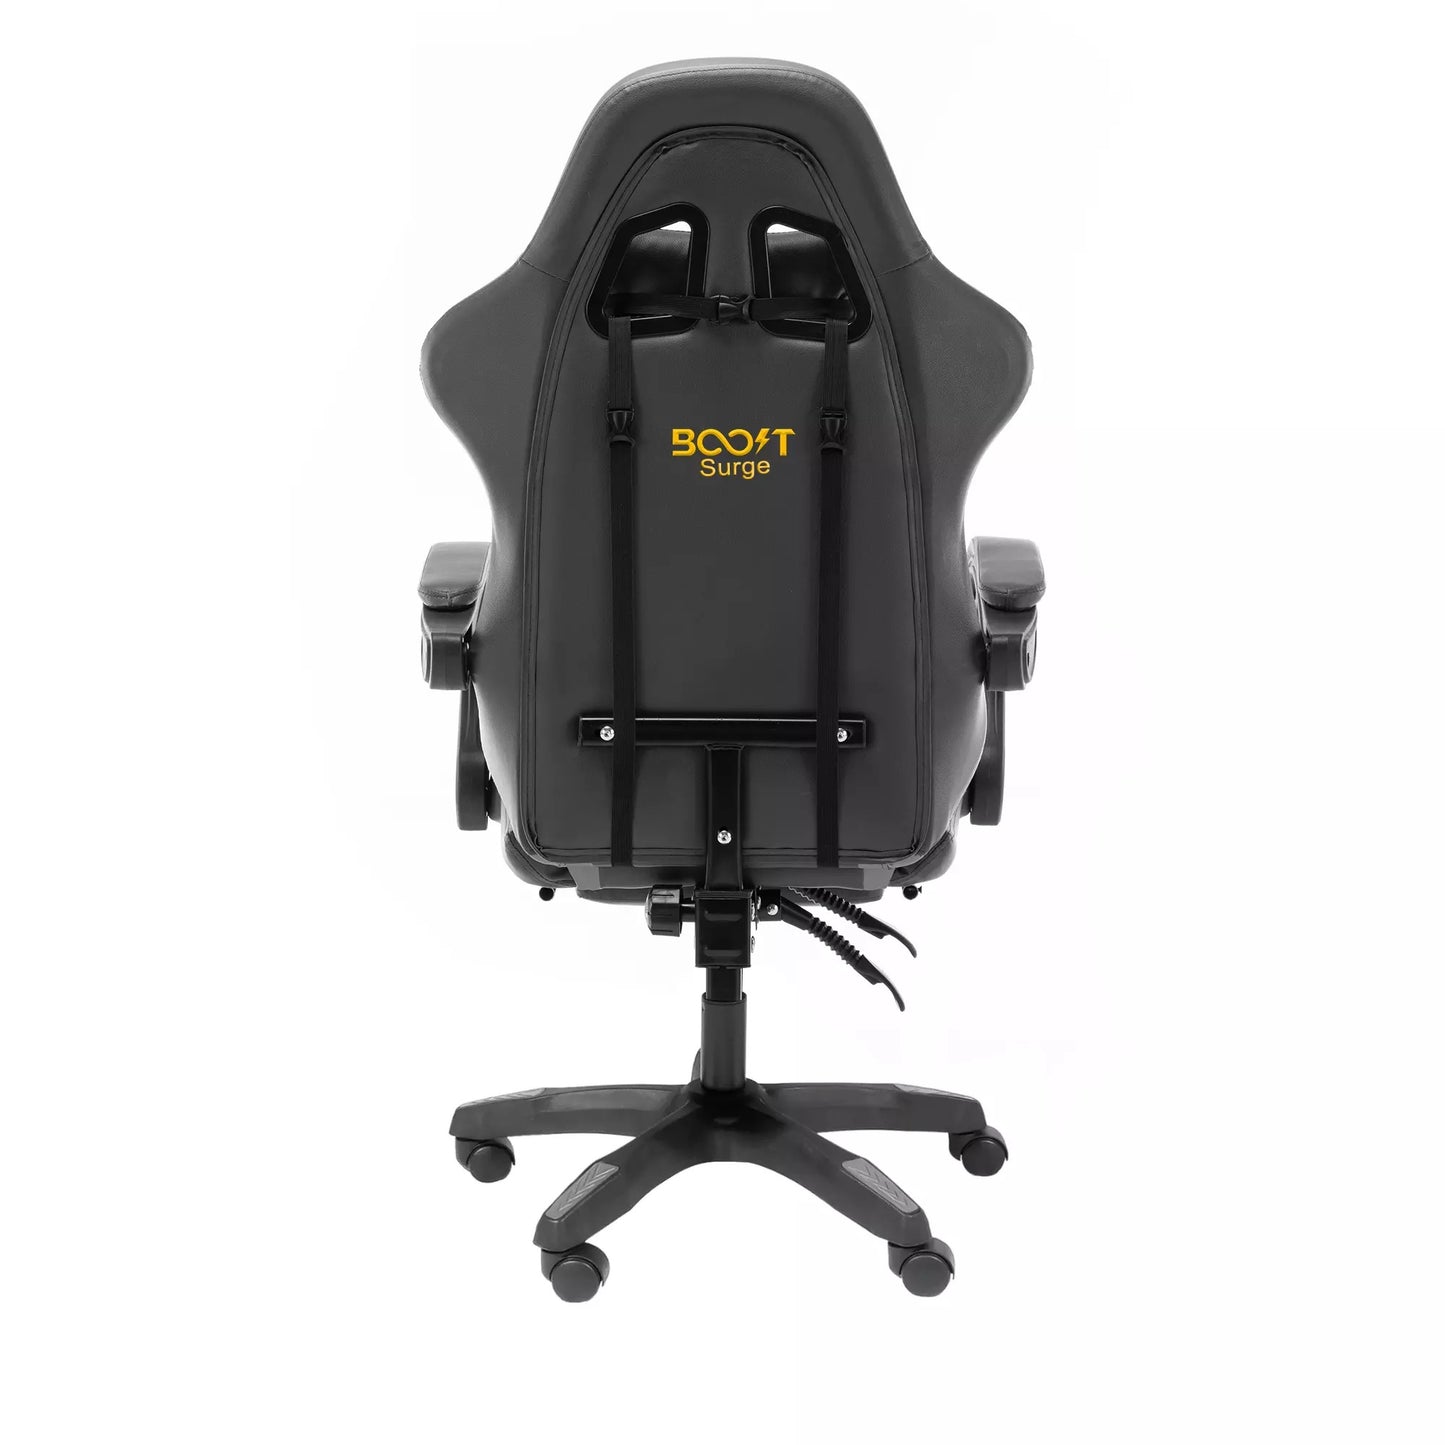 Boost Surge Black Gaming Chair Price in Pakistan